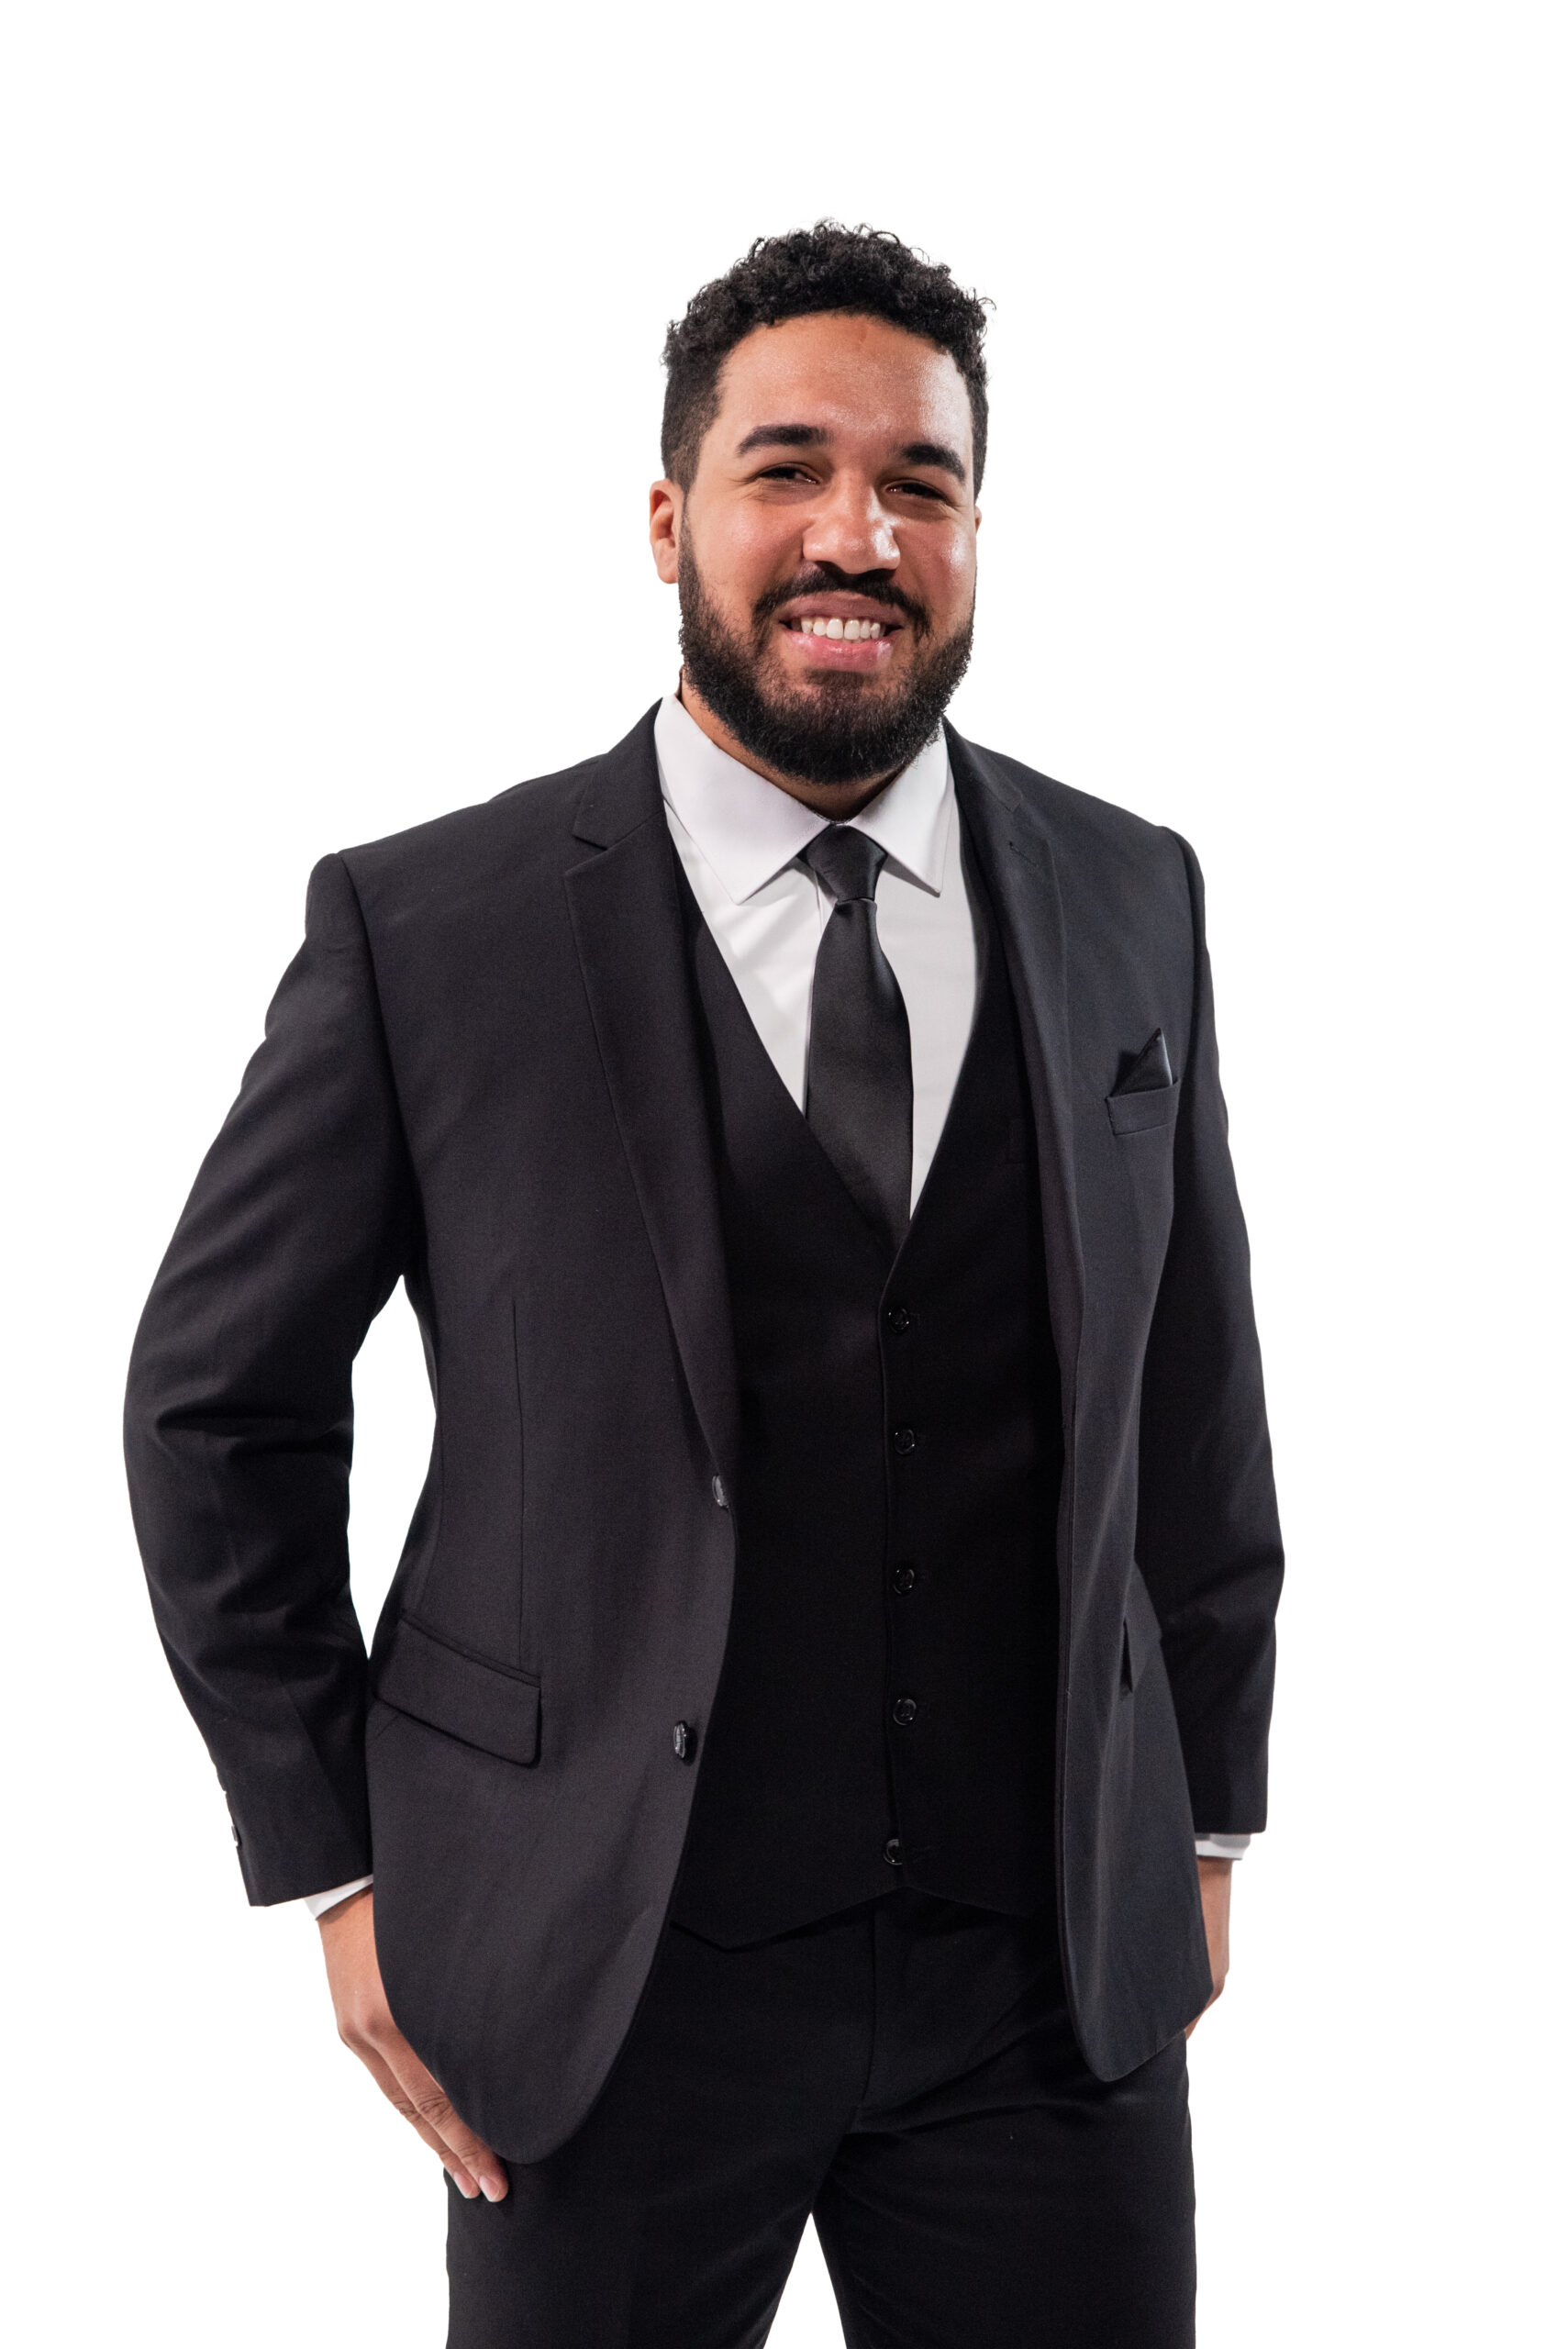 Man smiling wearing a black suit and tie